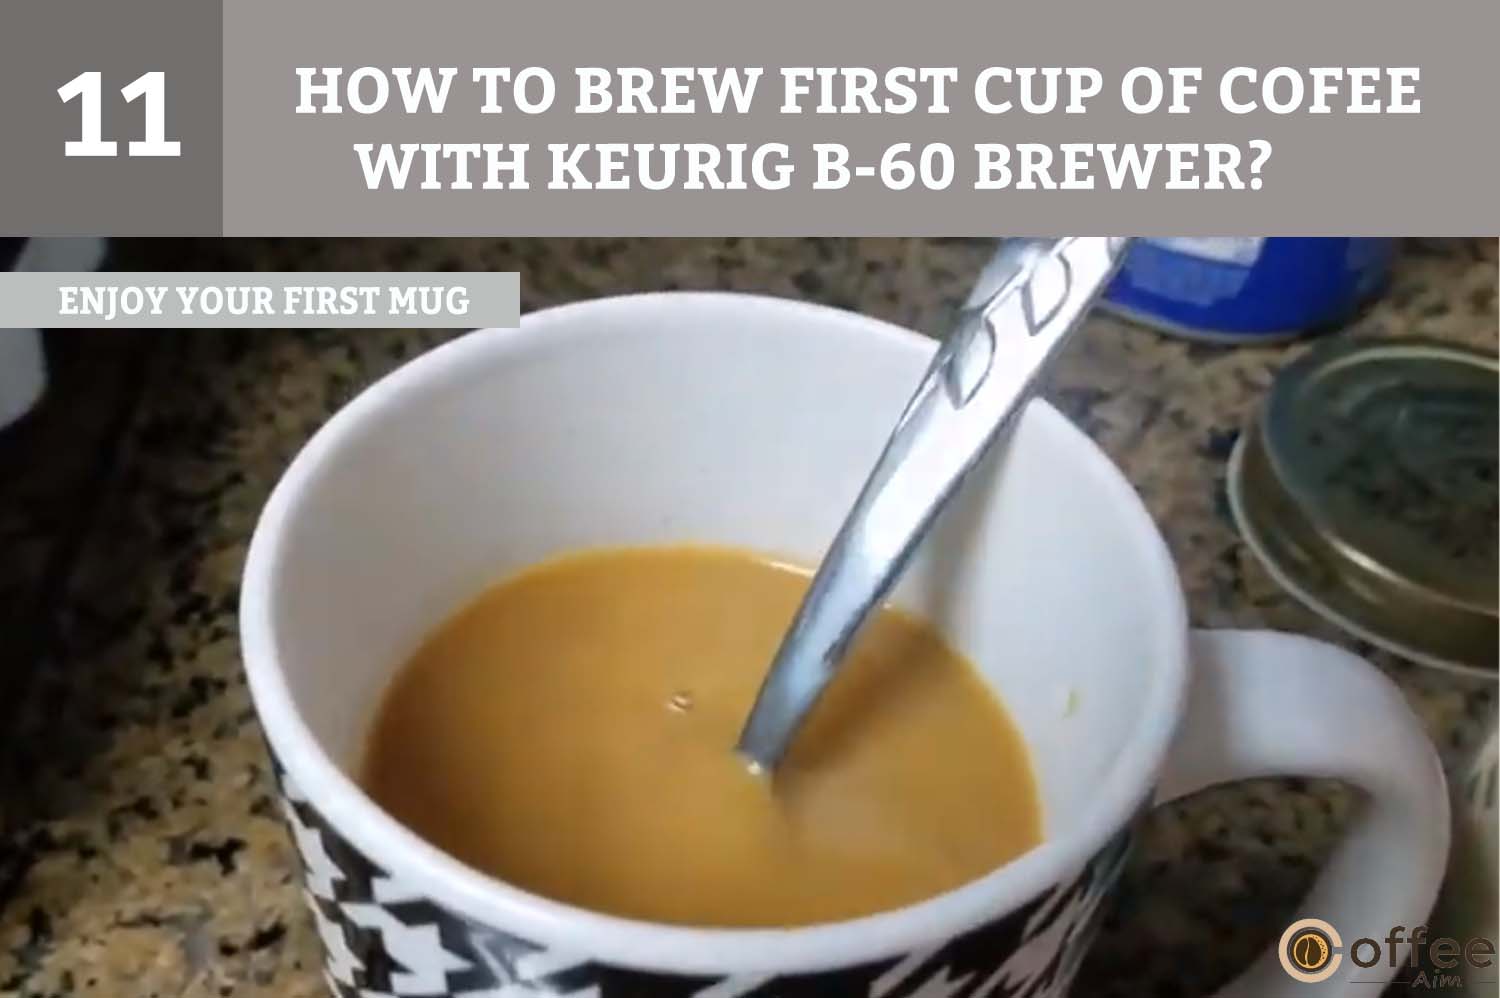 Now, sit back and savor your first delicious cup of coffee brewed with the Keurig B-60 Brewer. Enjoy!